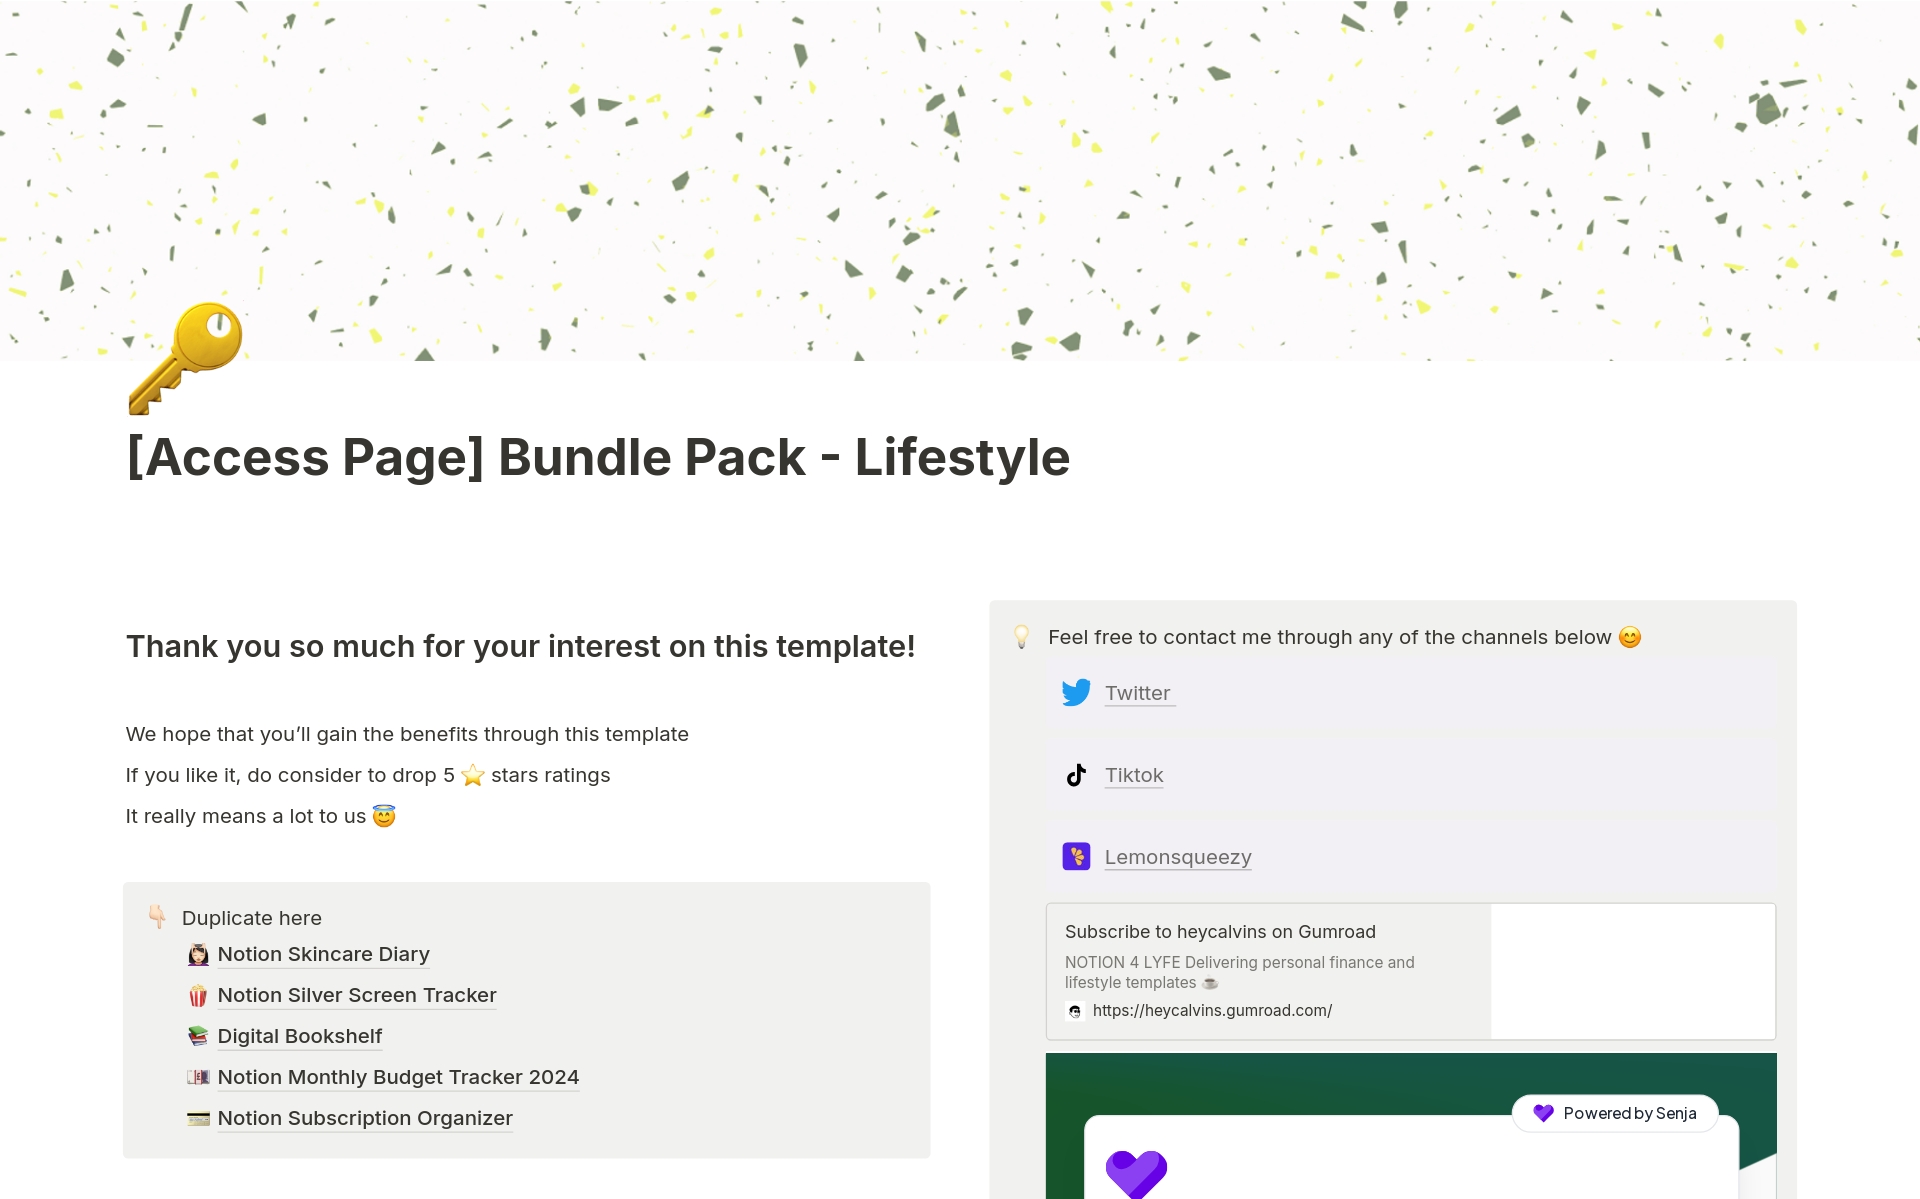 Bundle Pack Content:
• Notion Skincare Diary Template (Worth $7)
• Notion Monthly Budget Tracker 2024 Template (Worth $7)
• Notion Silver Screen Tracker Template (Worth $5)
• Notion Subscription Organizer Template (Worth $5)